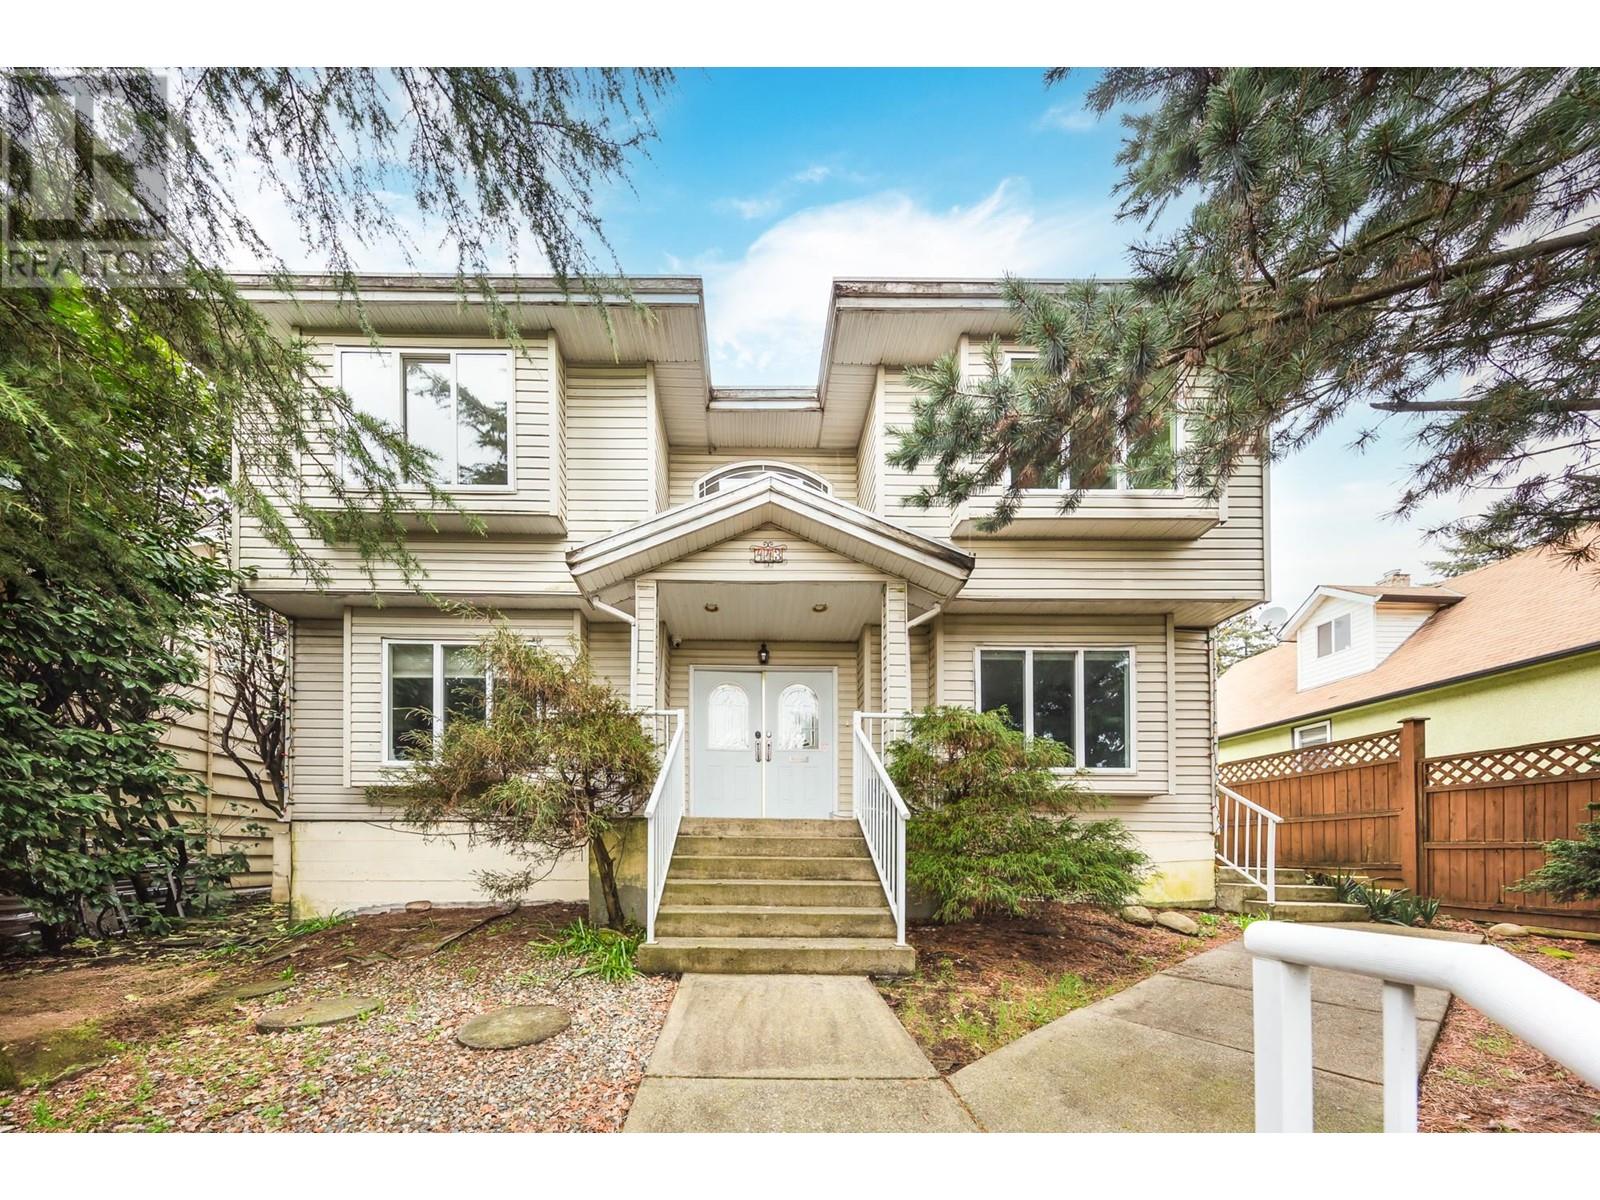 443 ROUSSEAU STREET, new westminster, British Columbia V3L3R4